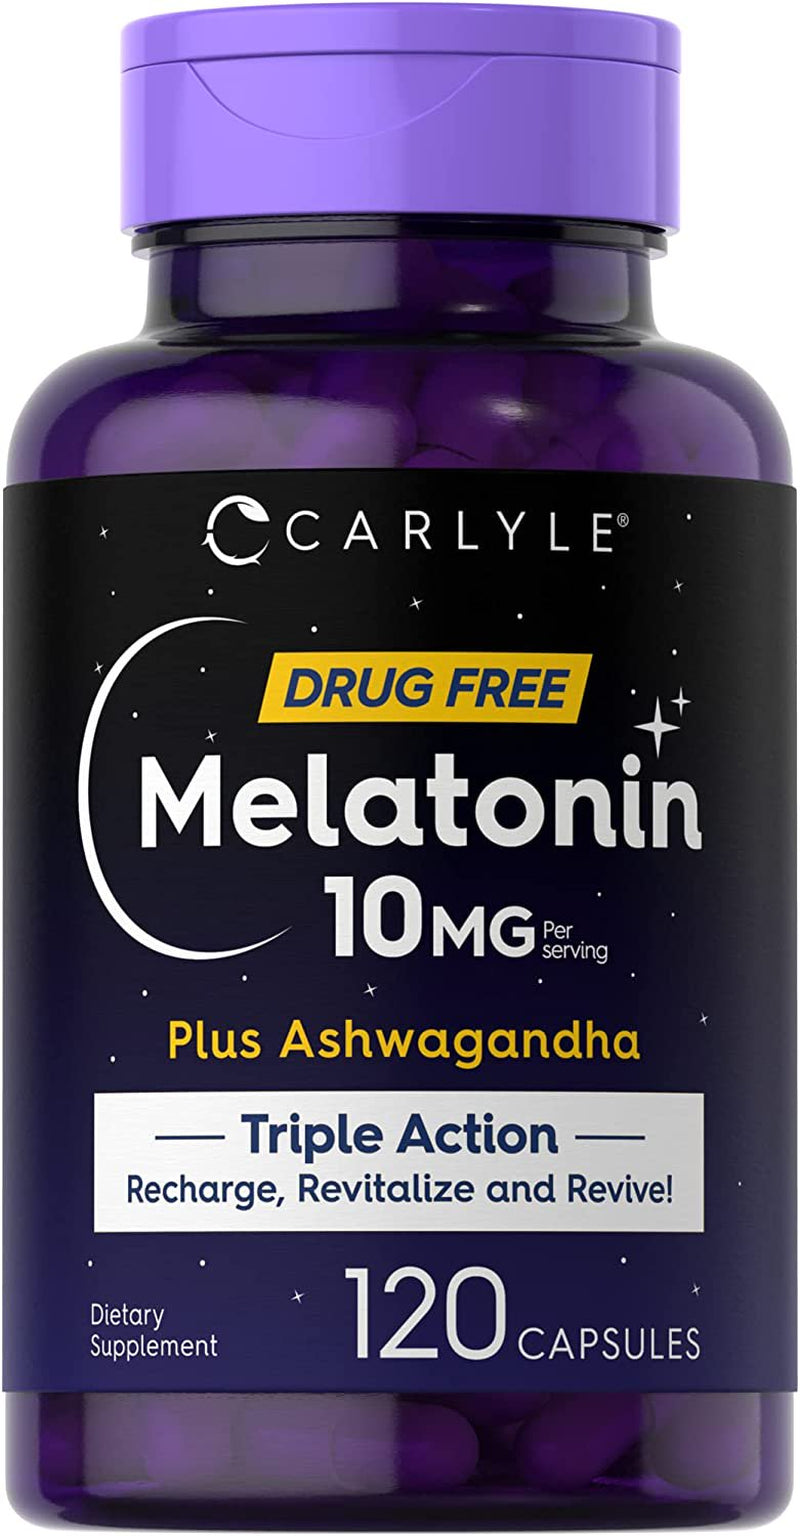 Melatonin 10Mg | 120 Capsules | with Ashwagandha | Triple Strength Formula | Non-Gmo, Gluten Free Supplement | by Carlyle